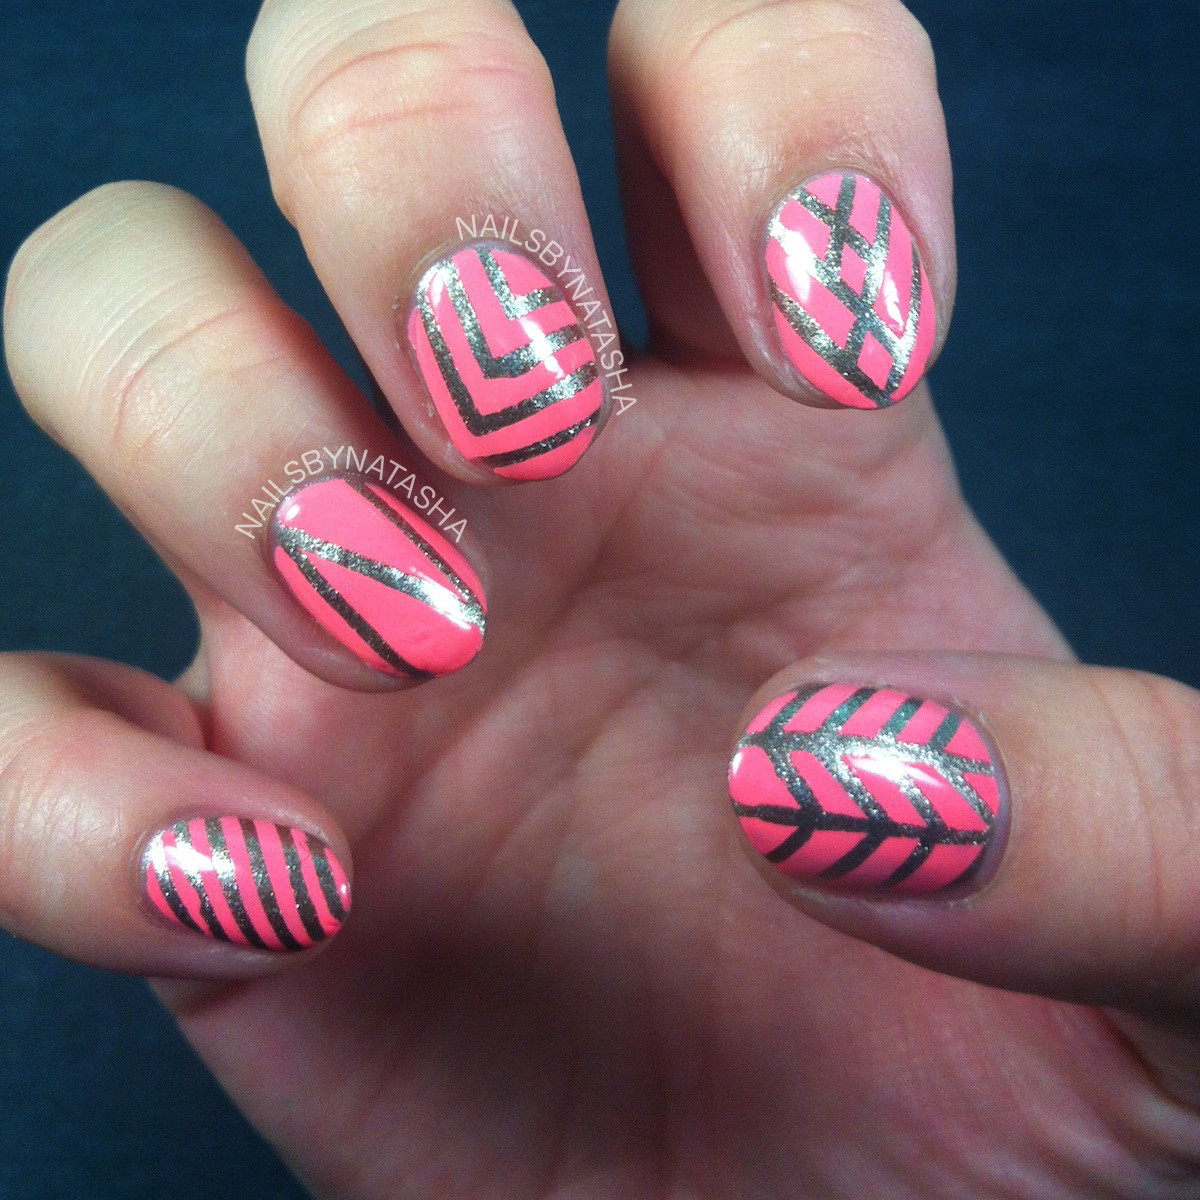 Nail Designs With Striping Tape
 Nails By Natasha First Striping Tape Designs